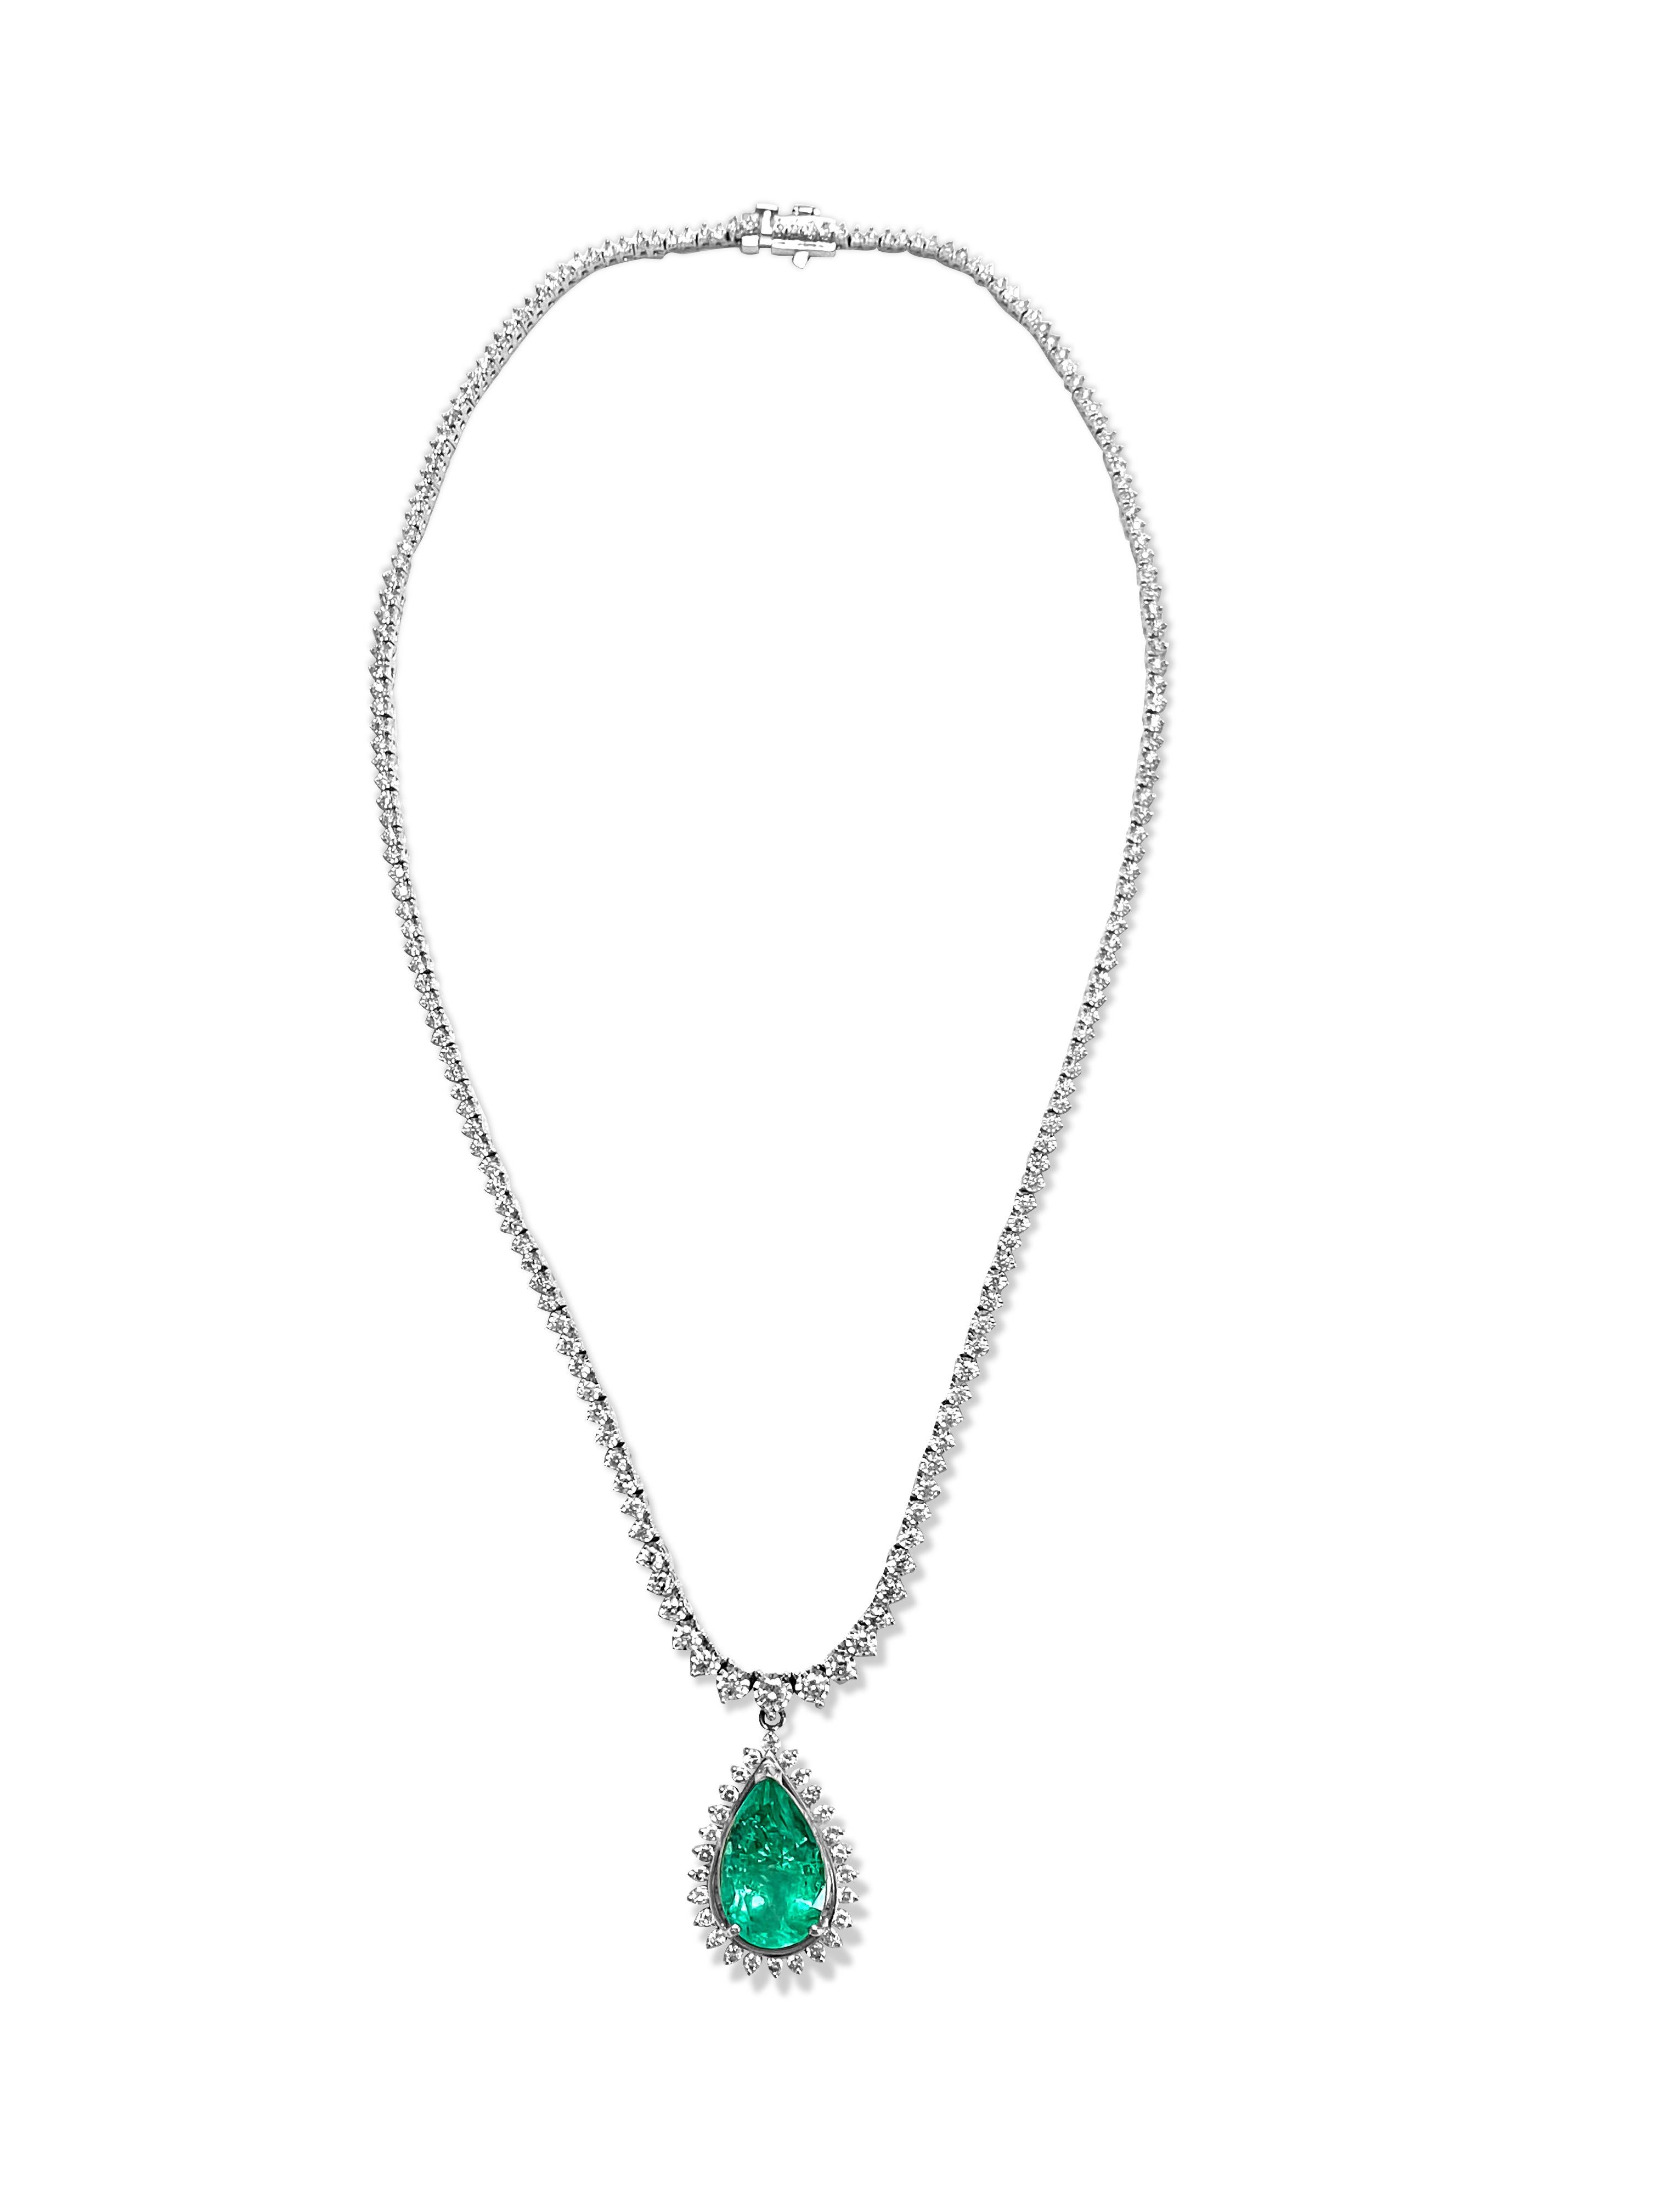 Metal: 14K White Gold. 
7.50 Carat Diamonds, Round Brilliant Cut, VS-SI Clarity, F-G Color. 

12.00 carat emerald, pear Shape. 100% natural earth mined Colombian emerald. Nice saturation and color. 
All diamonds and emerald are set in prong setting.